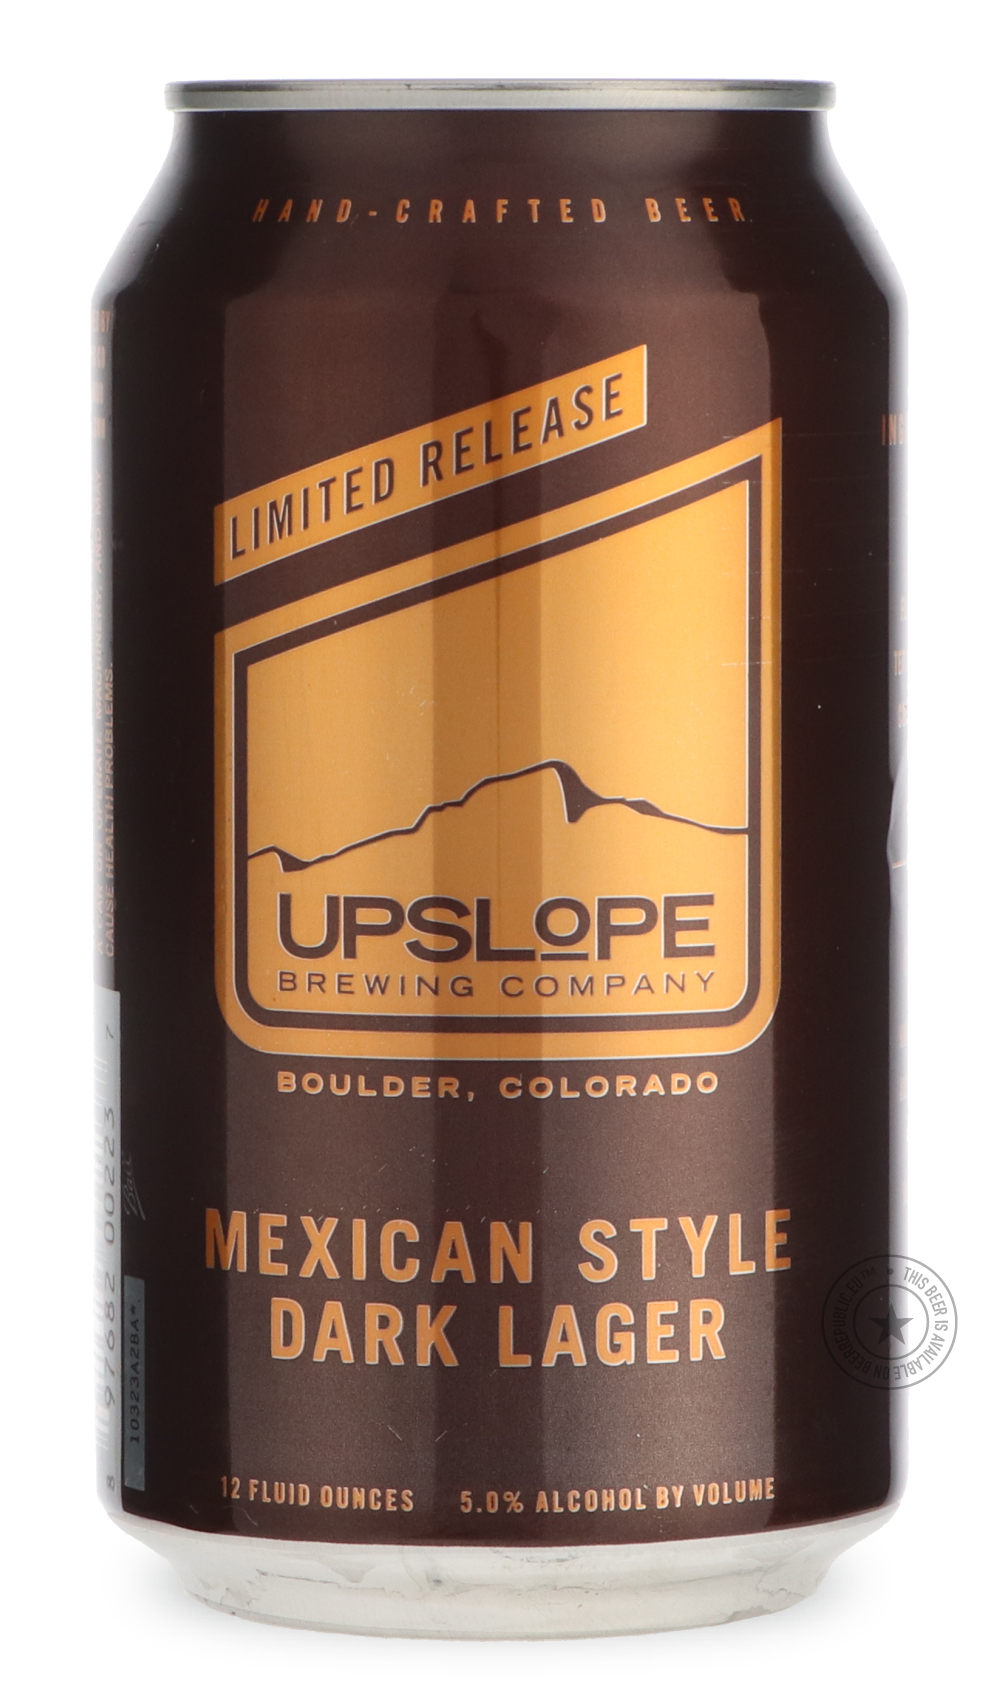 -Upslope- Mexican Style Dark Lager-Brown & Dark- Only @ Beer Republic - The best online beer store for American & Canadian craft beer - Buy beer online from the USA and Canada - Bier online kopen - Amerikaans bier kopen - Craft beer store - Craft beer kopen - Amerikanisch bier kaufen - Bier online kaufen - Acheter biere online - IPA - Stout - Porter - New England IPA - Hazy IPA - Imperial Stout - Barrel Aged - Barrel Aged Imperial Stout - Brown - Dark beer - Blond - Blonde - Pilsner - Lager - Wheat - Weizen